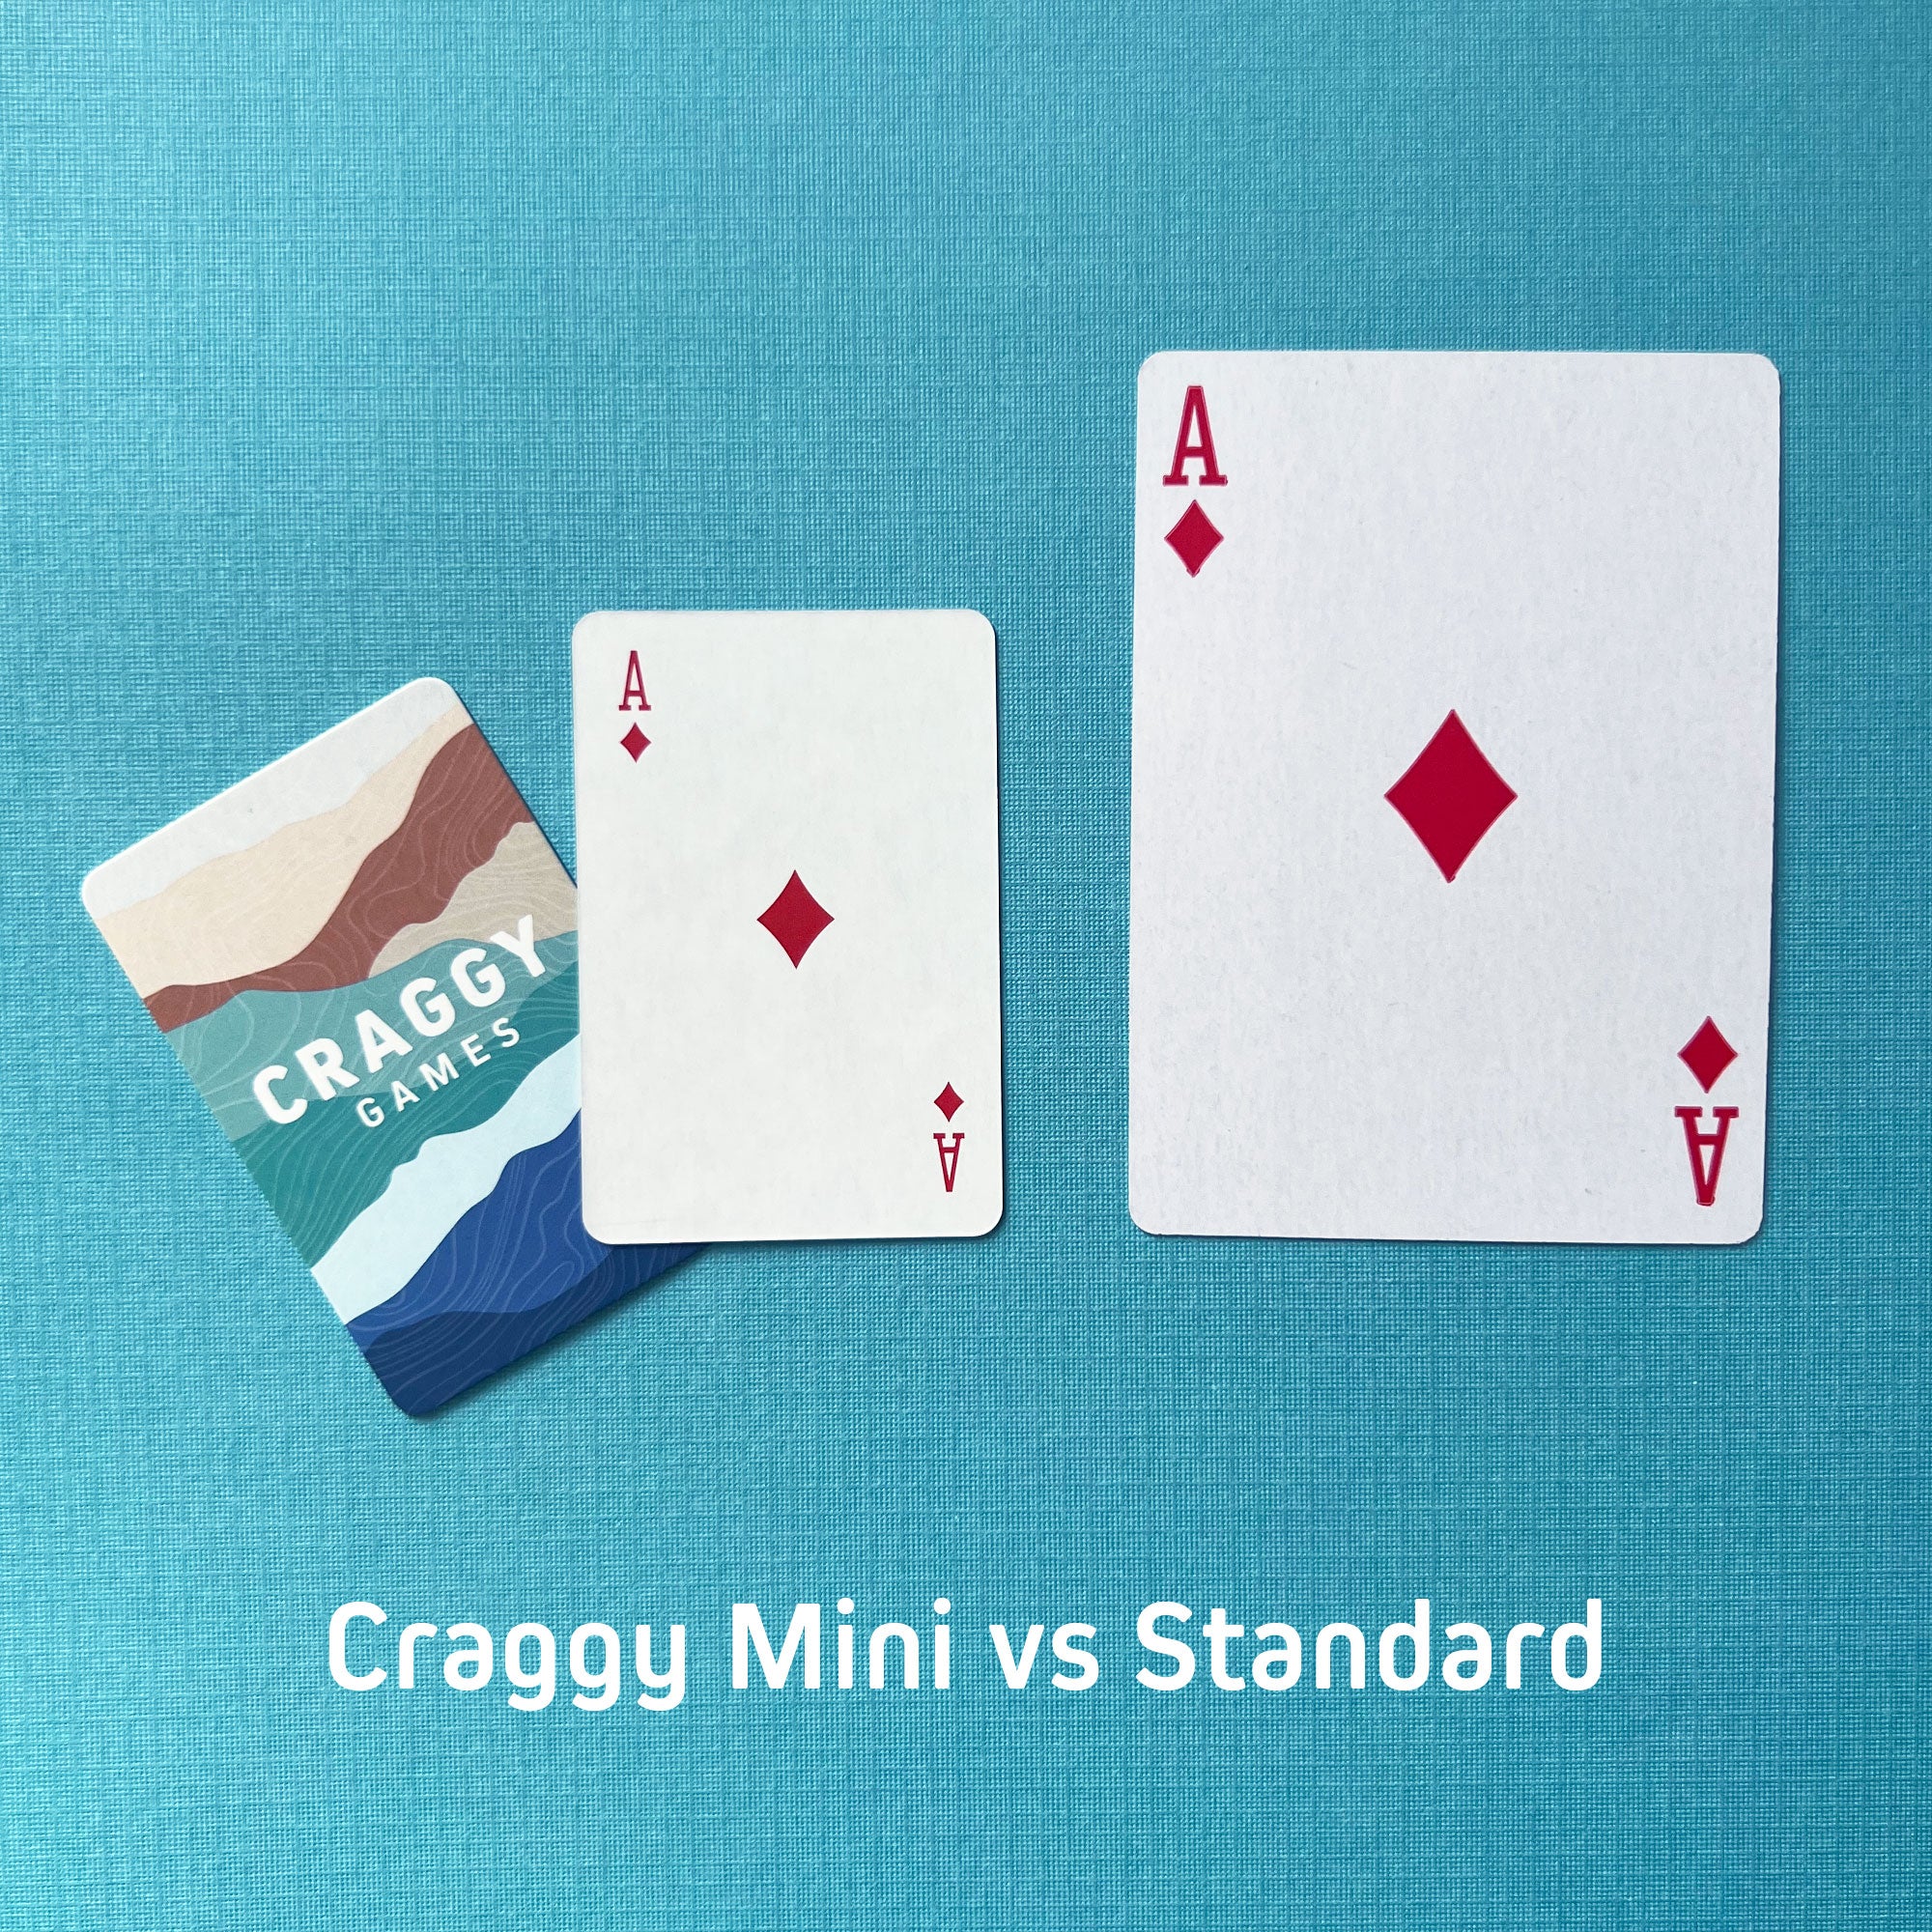 Mini Playing Cards - 52 Card Deck